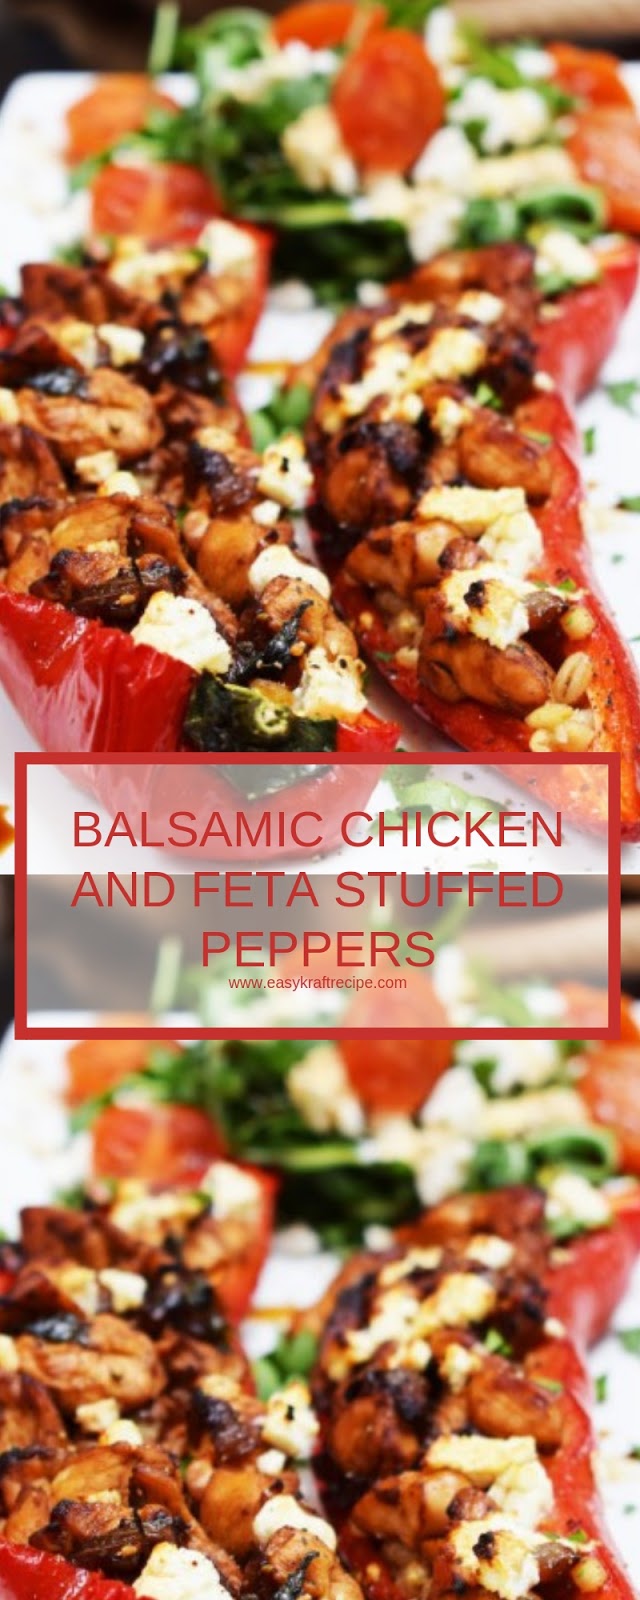 BALSAMIC CHICKEN AND FETA STUFFED PEPPERS